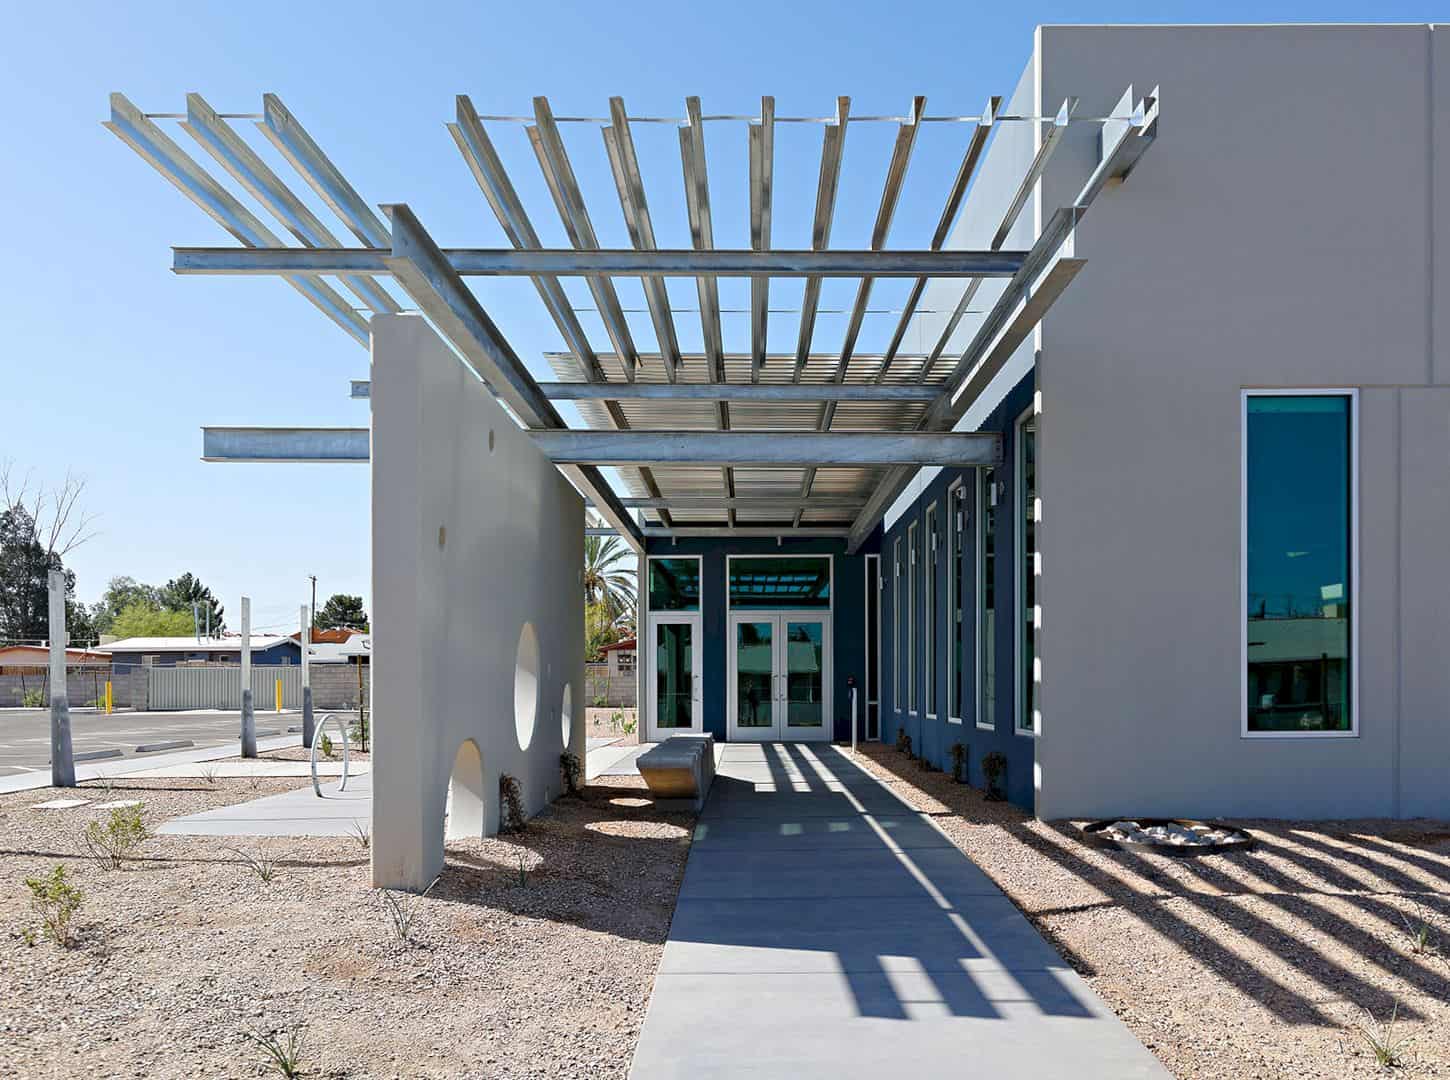 Ssa Tucson The Tilt Up Concrete Facility In Tucsons Welcoming Environment 12